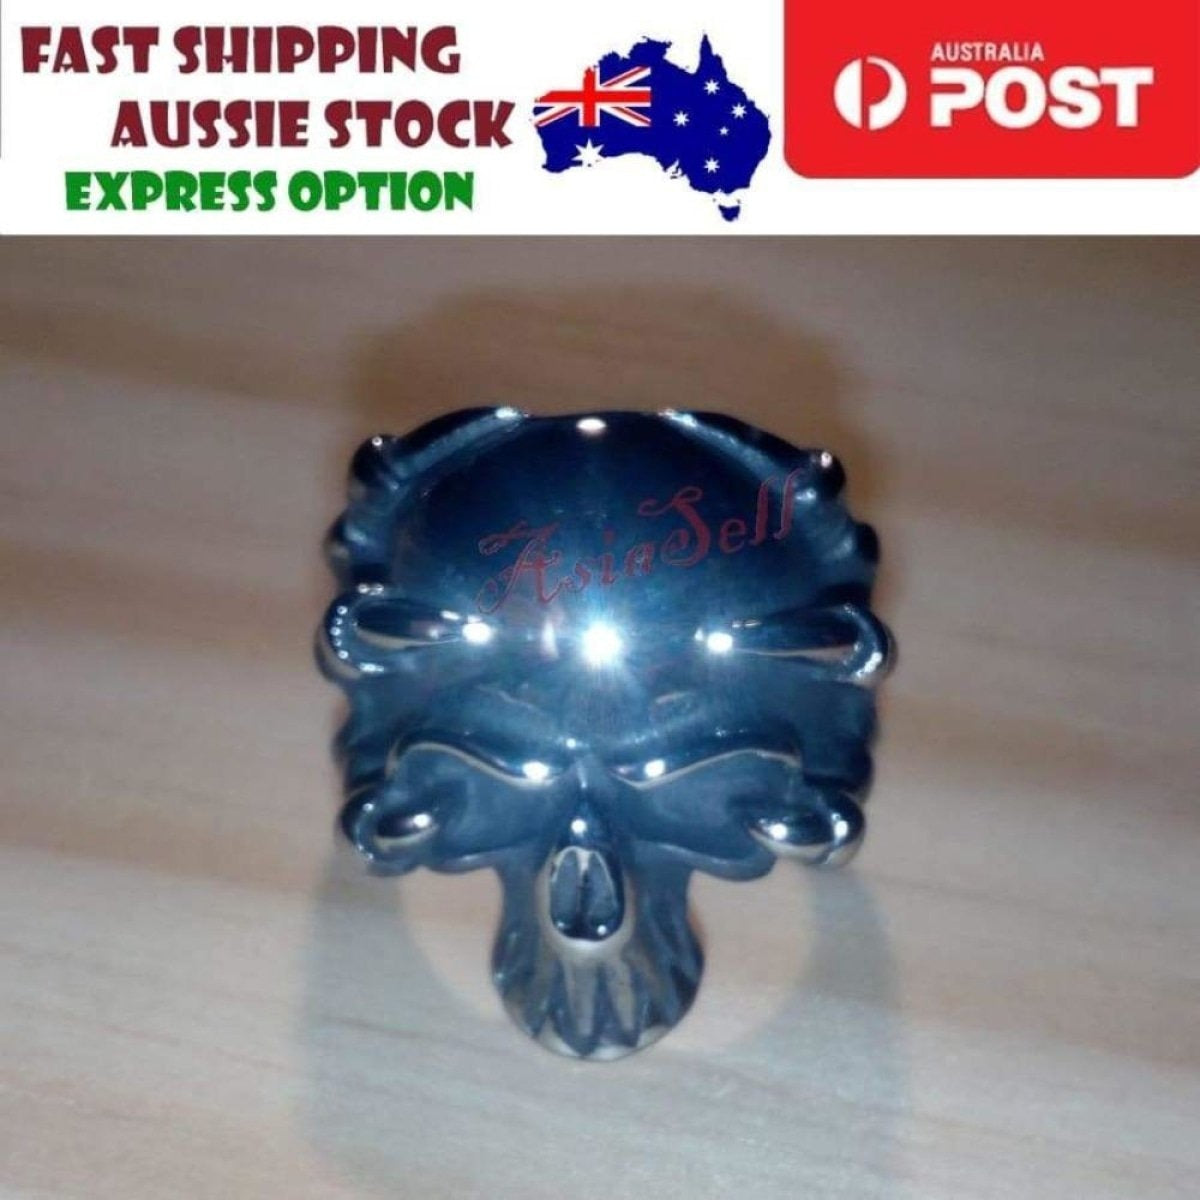 Stainless Steel Skull Ring Head Evil Ring Rings Black Silver Gold Silver Biker | Asia Sell  -  Type 8 Size 9 U.S. 60mm